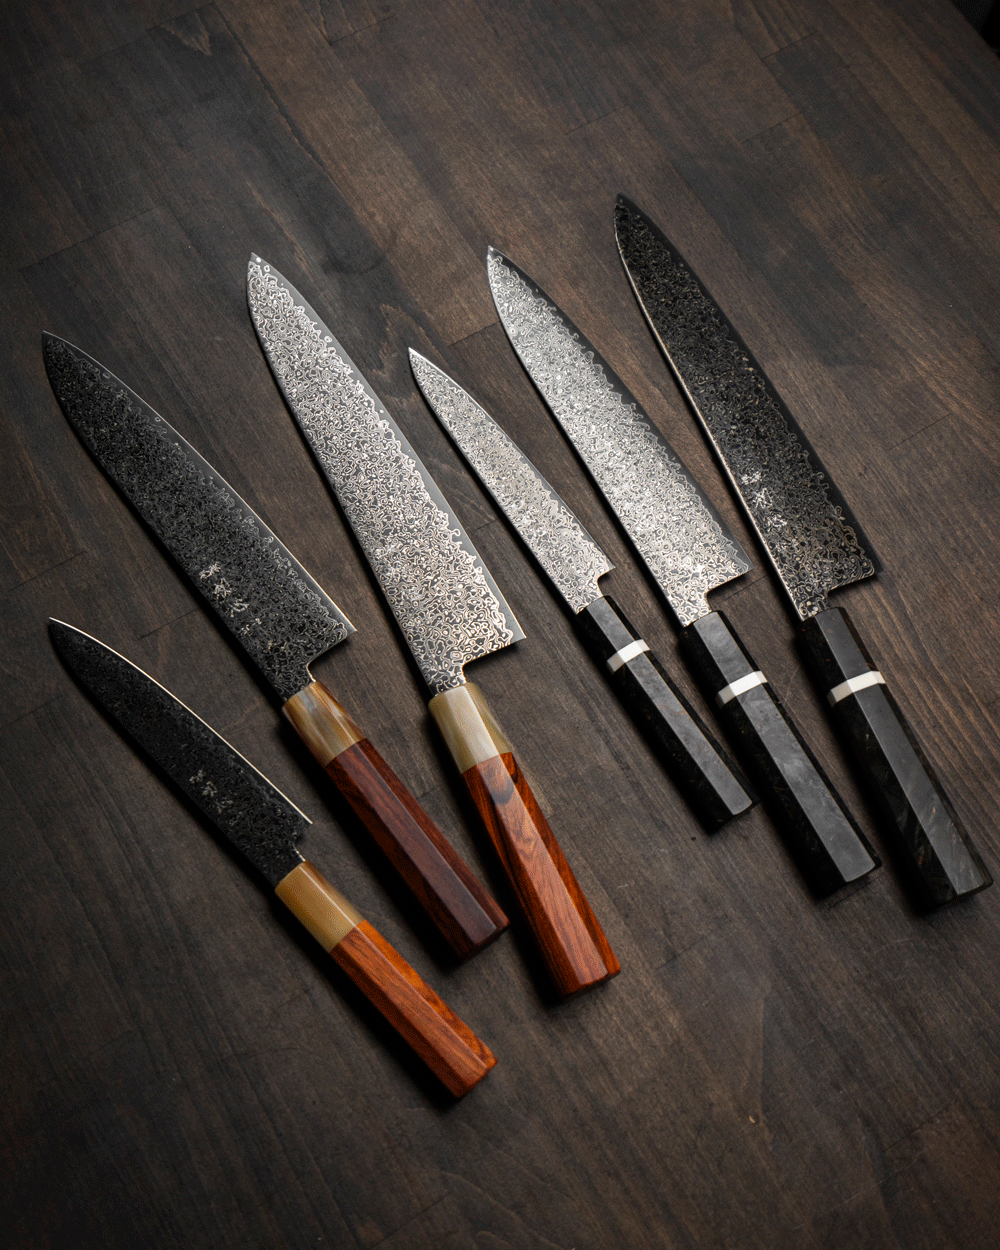 Group of Japanese knives